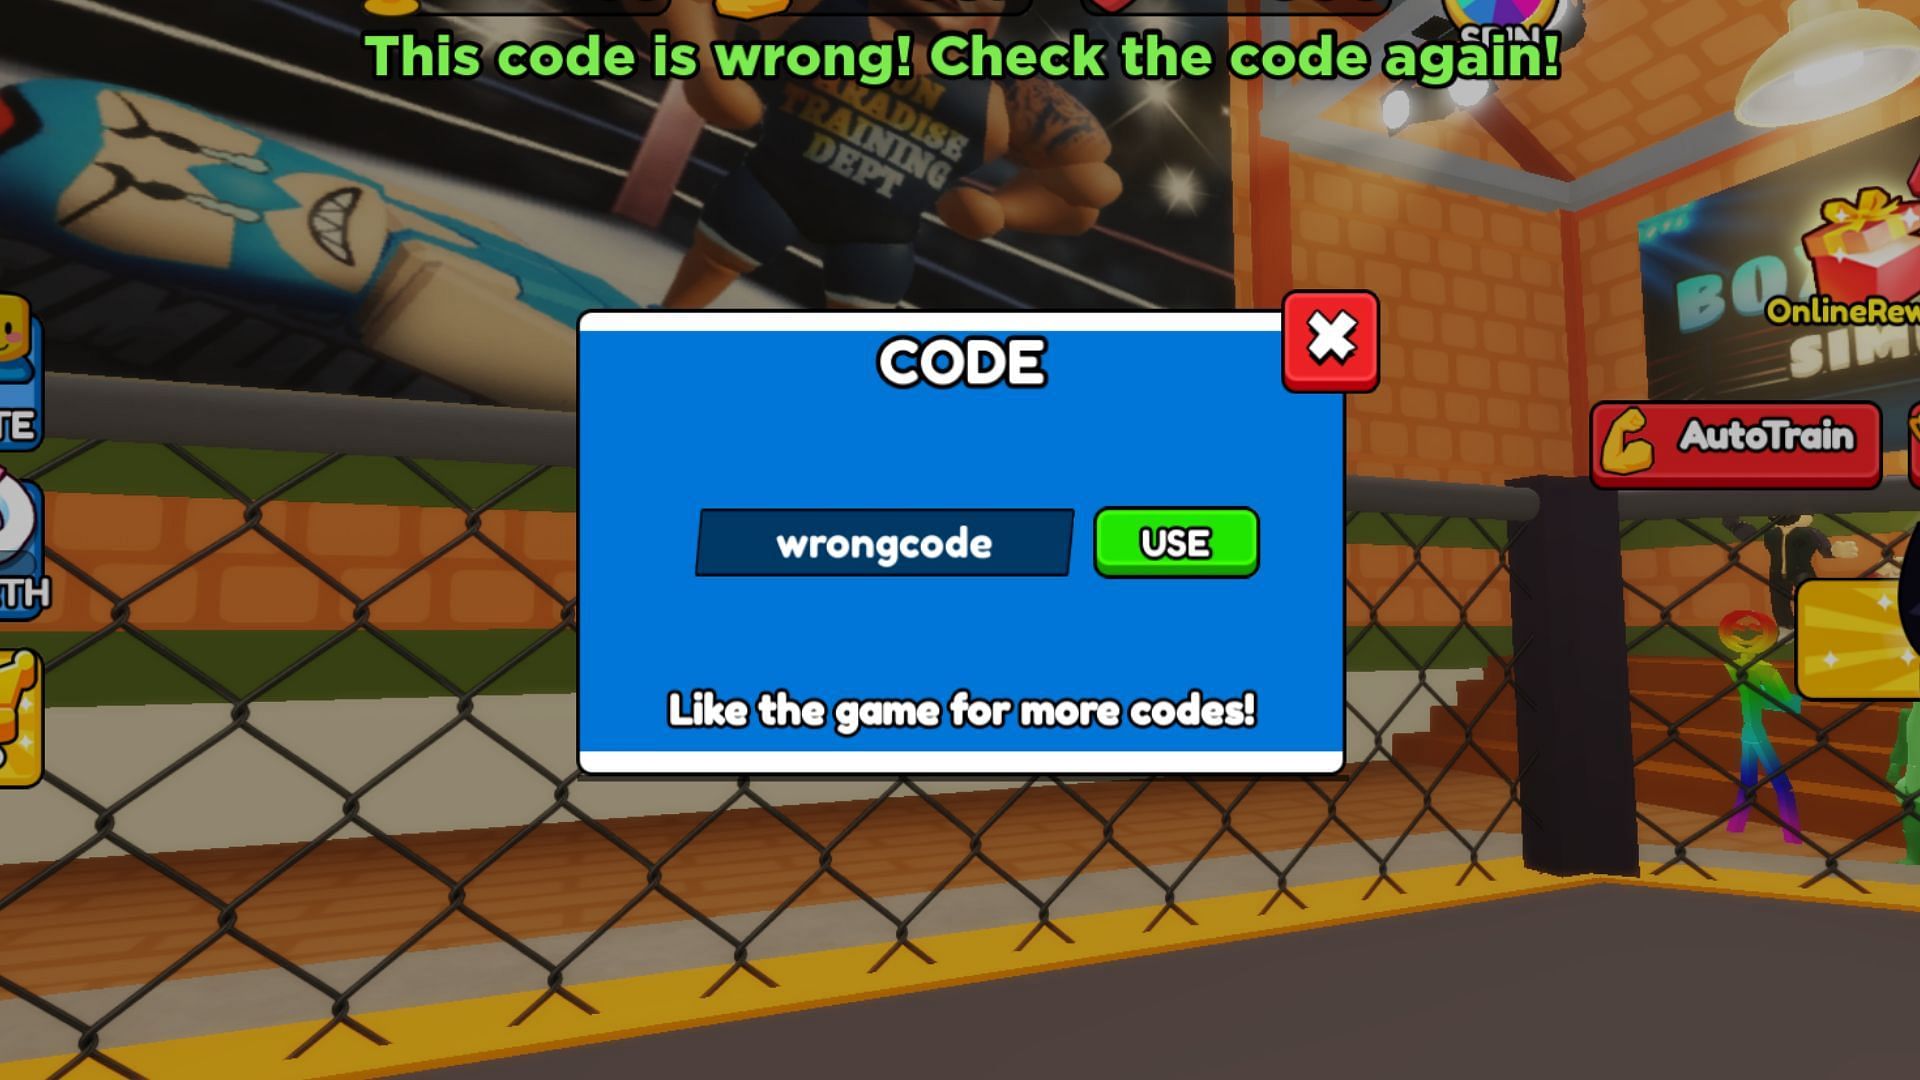 This code is wrong! Check the code again! error message. (Image via Roblox || Sportskeeda)